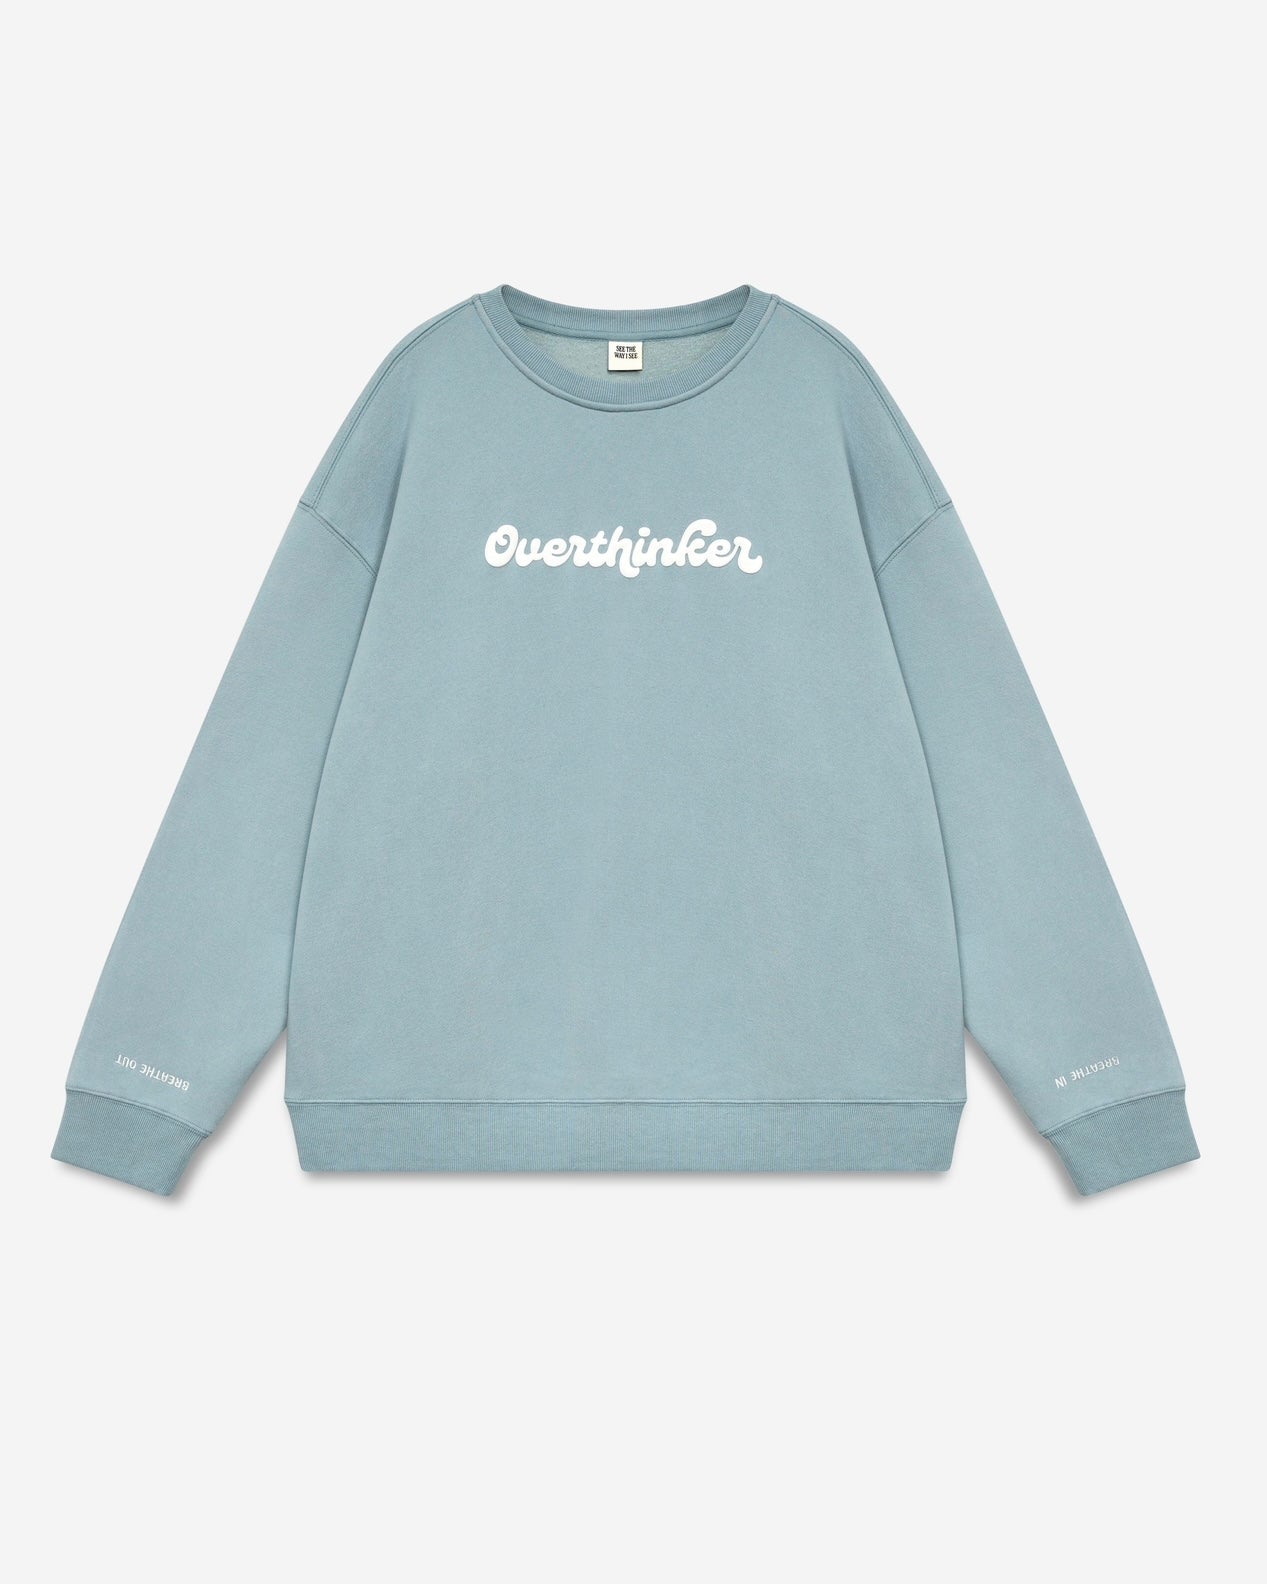 Overthinker (breathe in & out) Crewneck